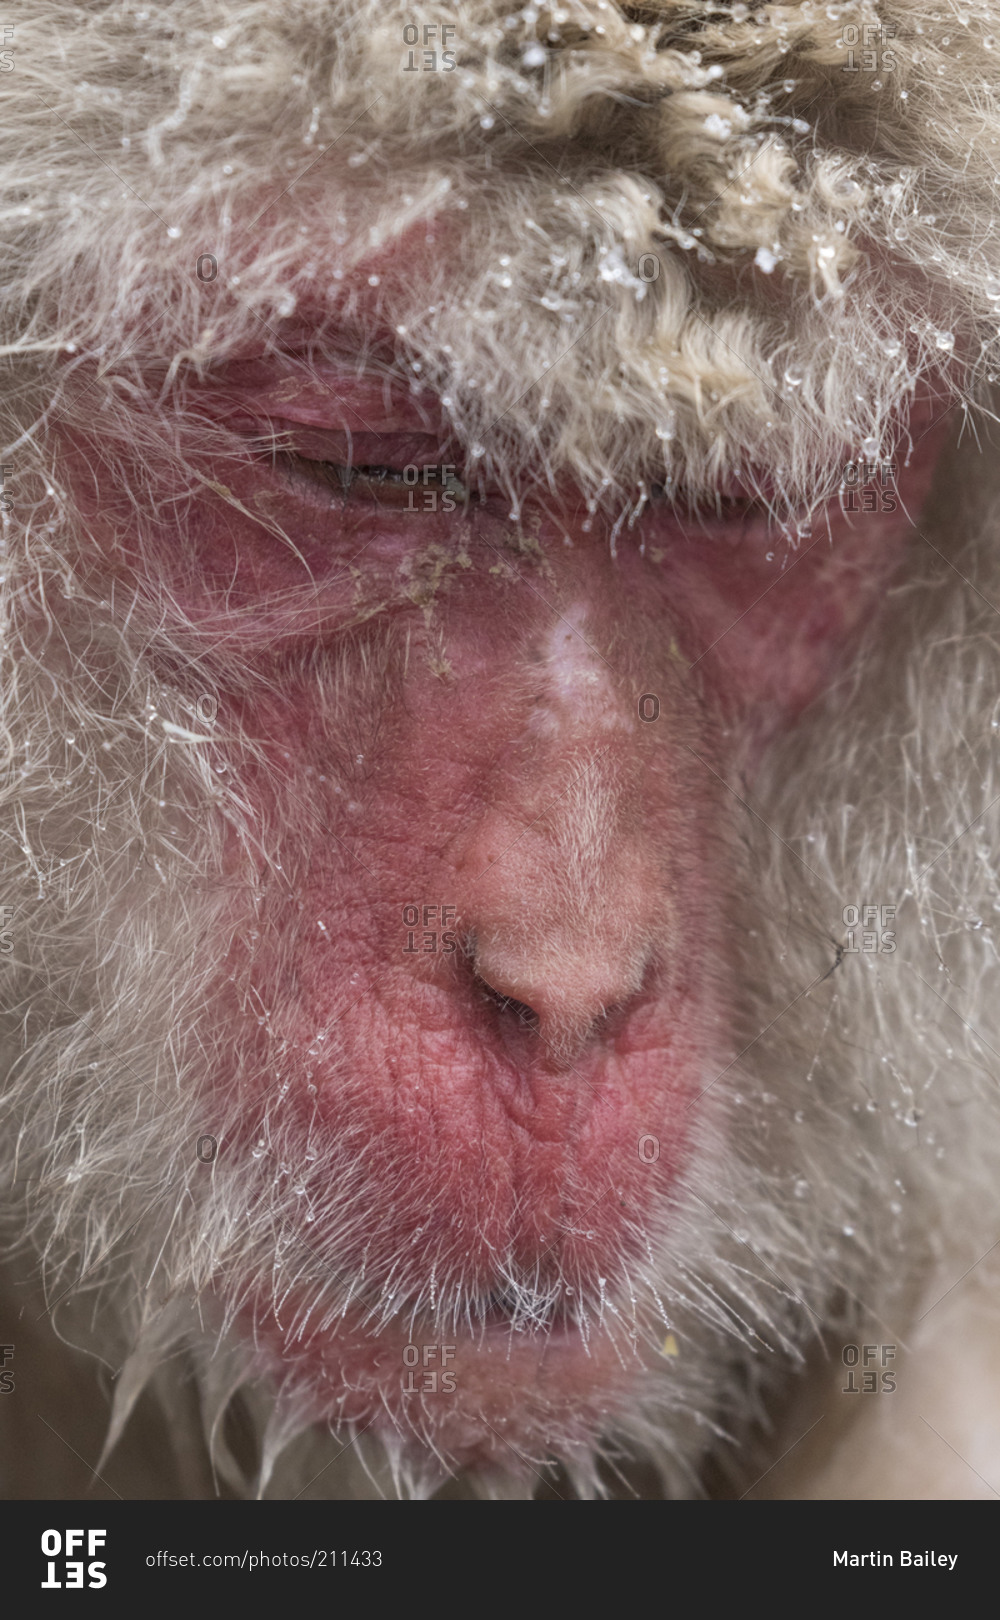 Close up of face of Japanese snow monkey